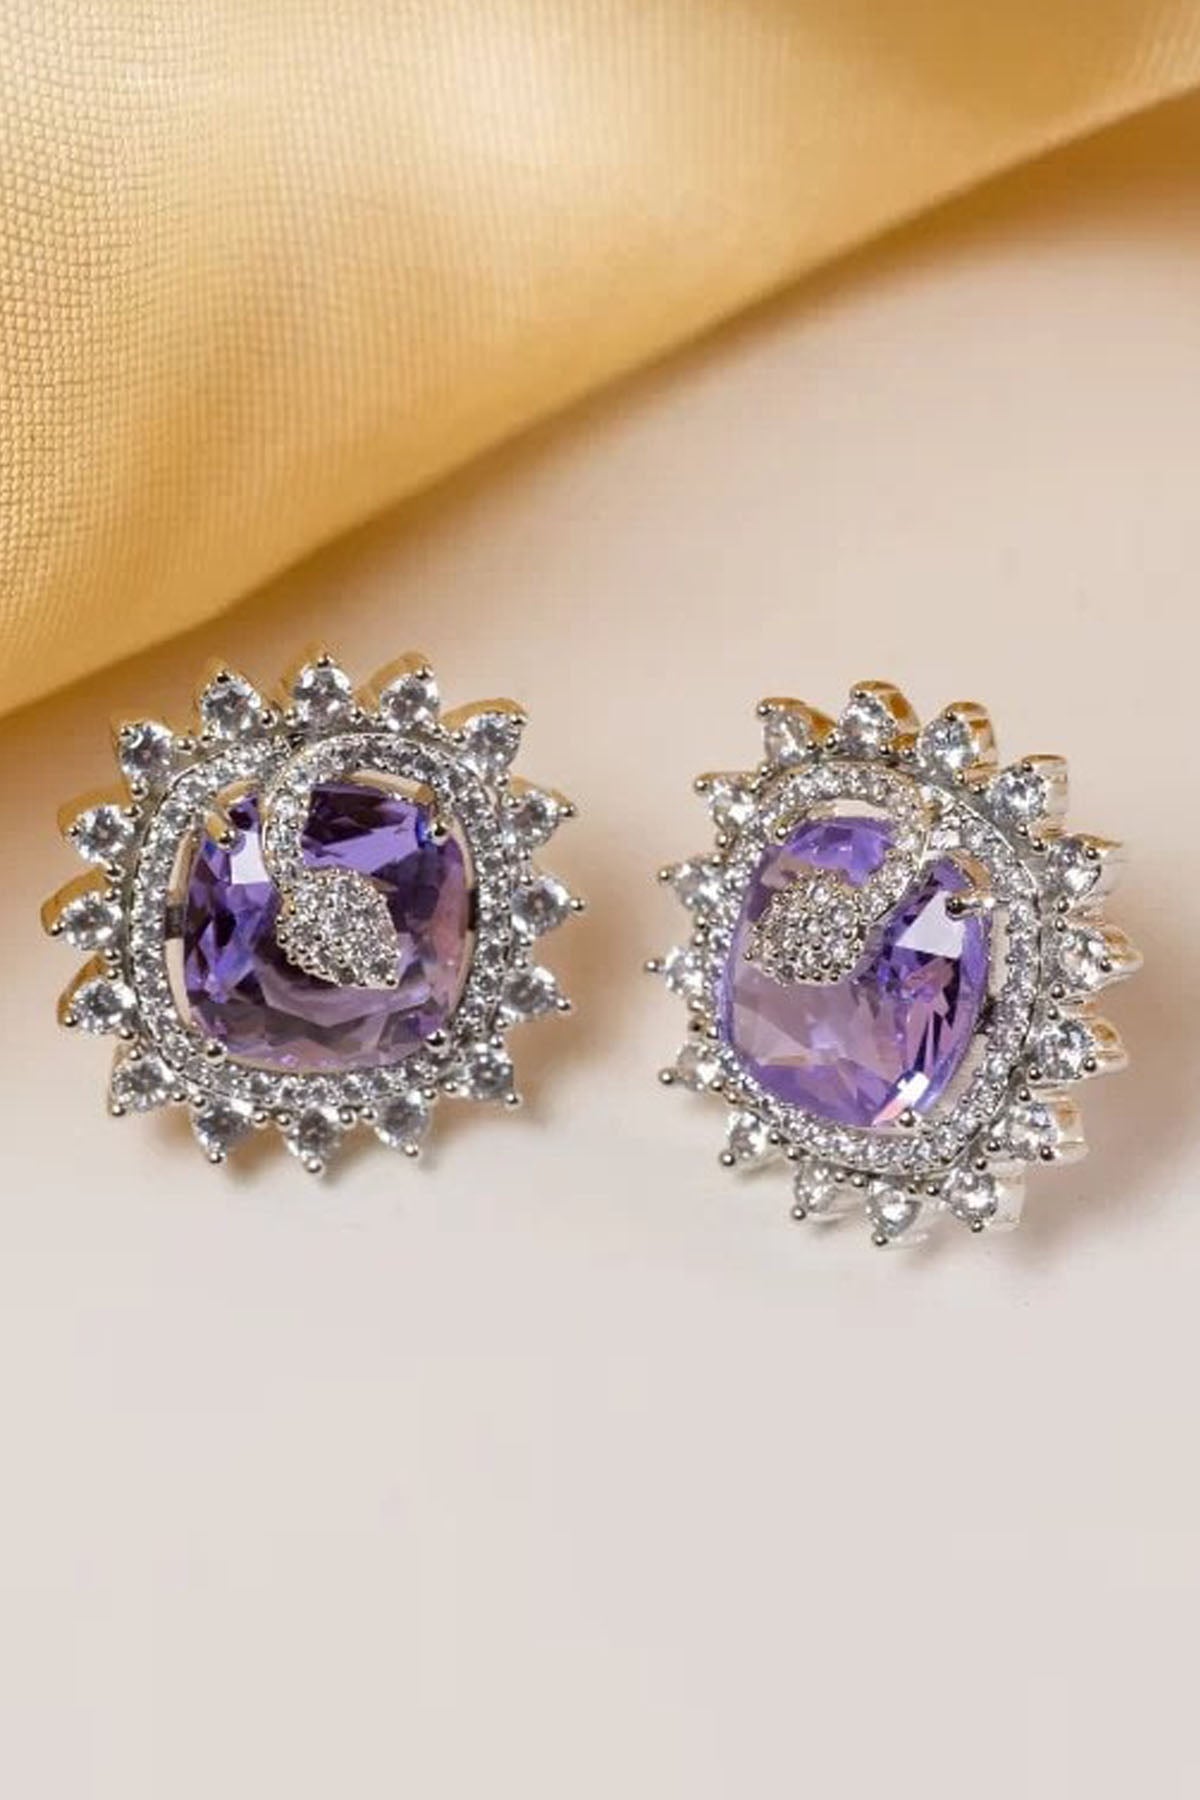 Purple Crystal Stud Earrings of Brand Putstyle Available online at ScrollnShops